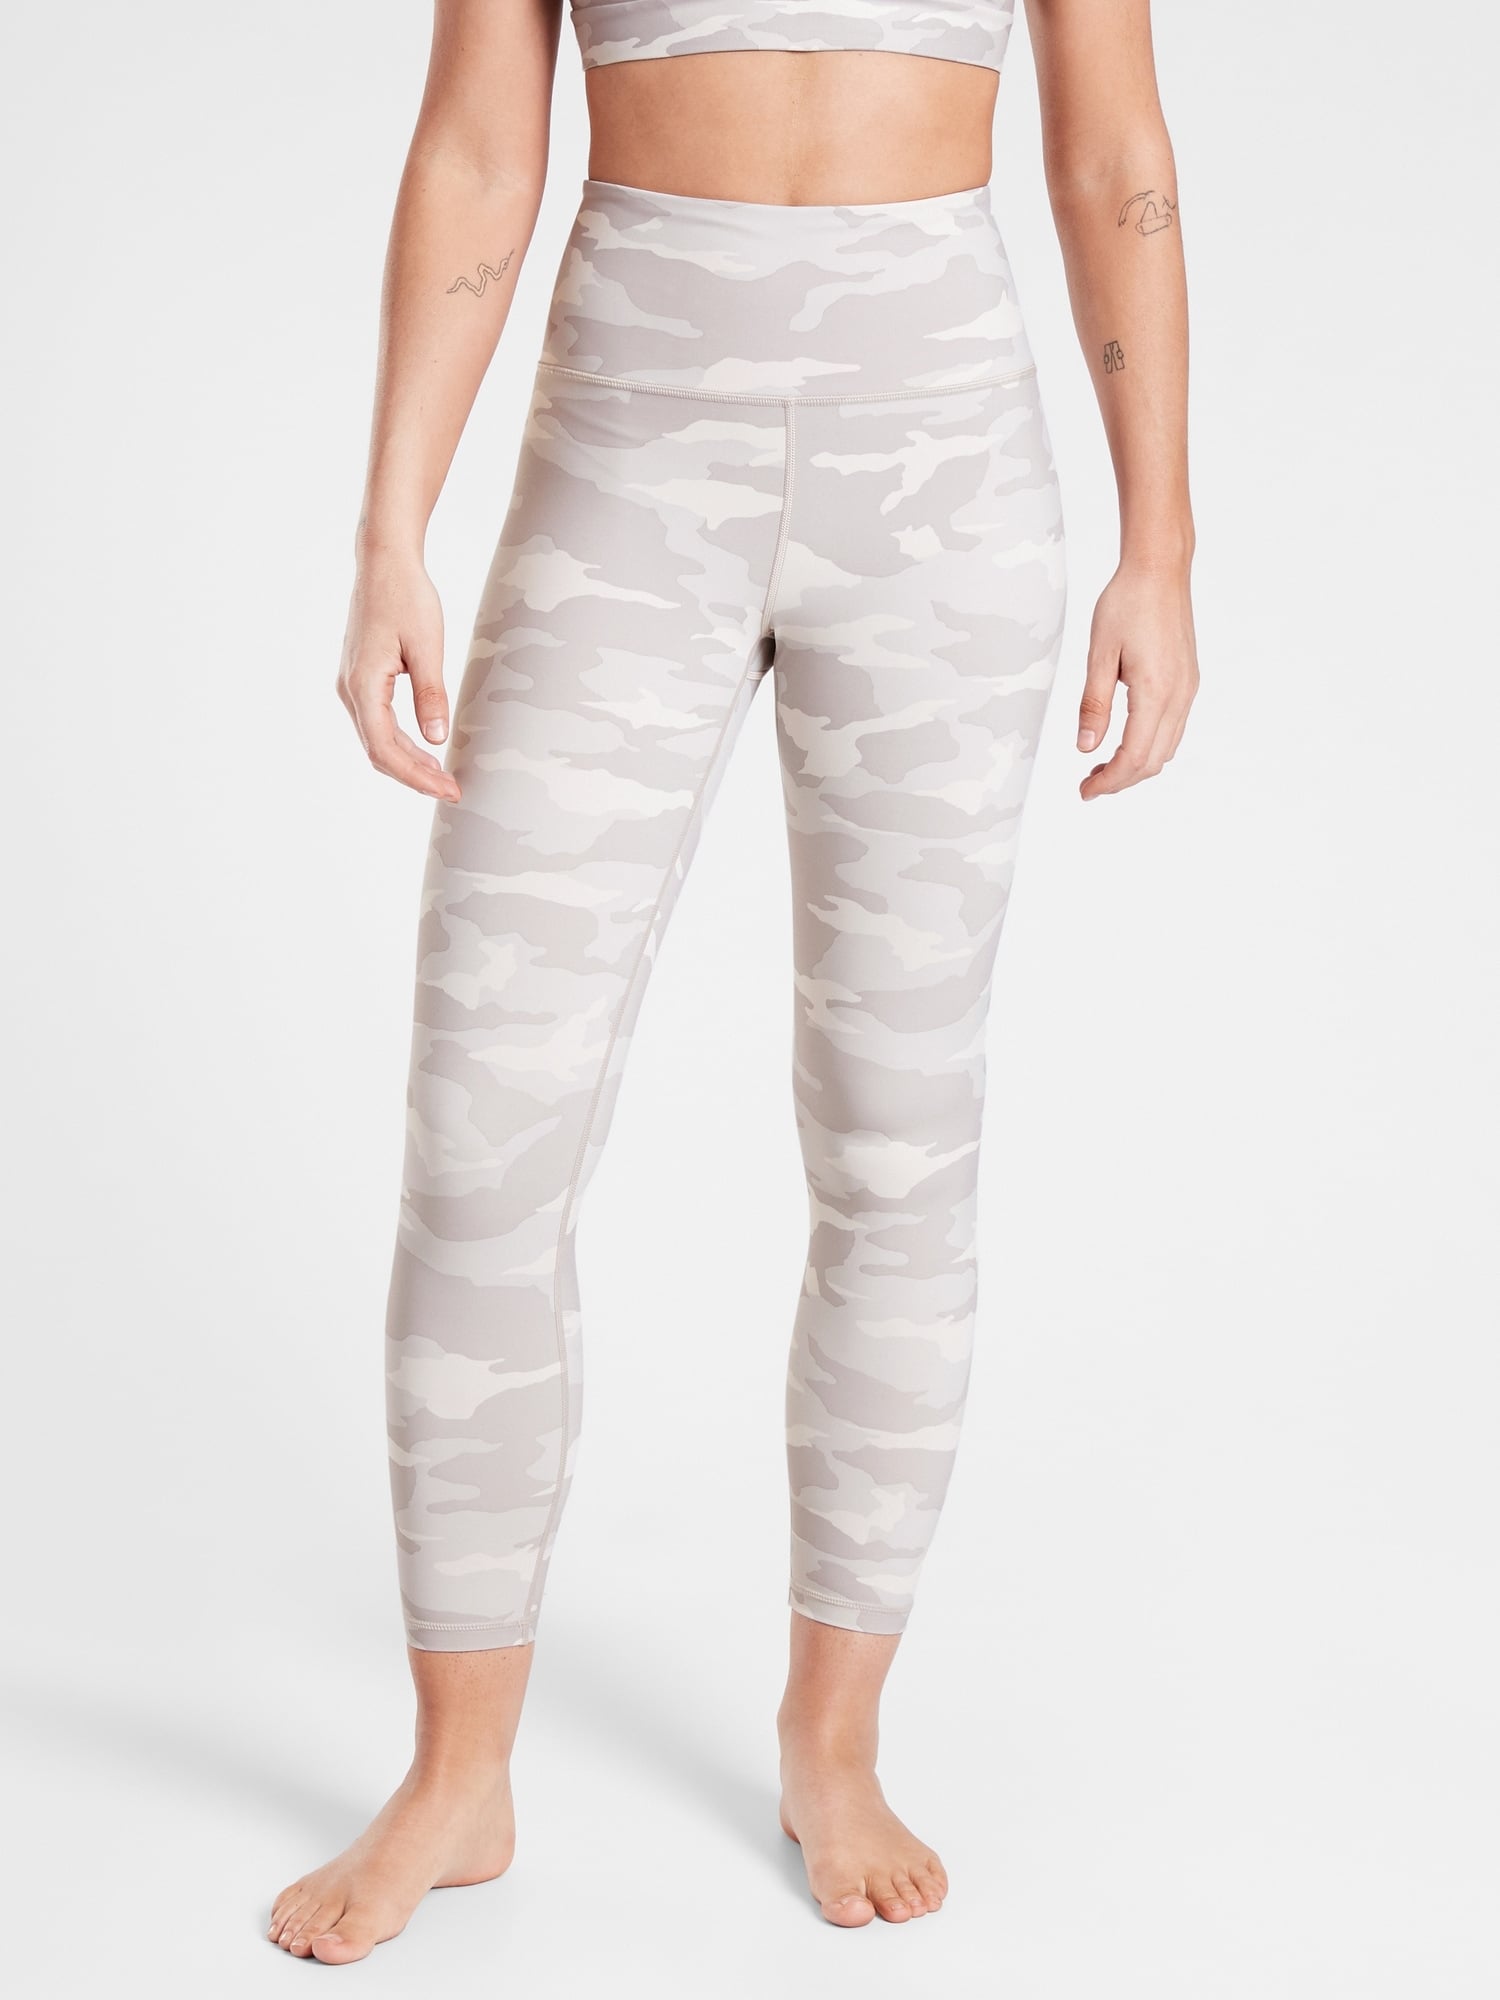 Athleta Salutation Jogger Camo, Gym Class Hero! This Brand Has the Best  Mother-Daughter Fitness Sets